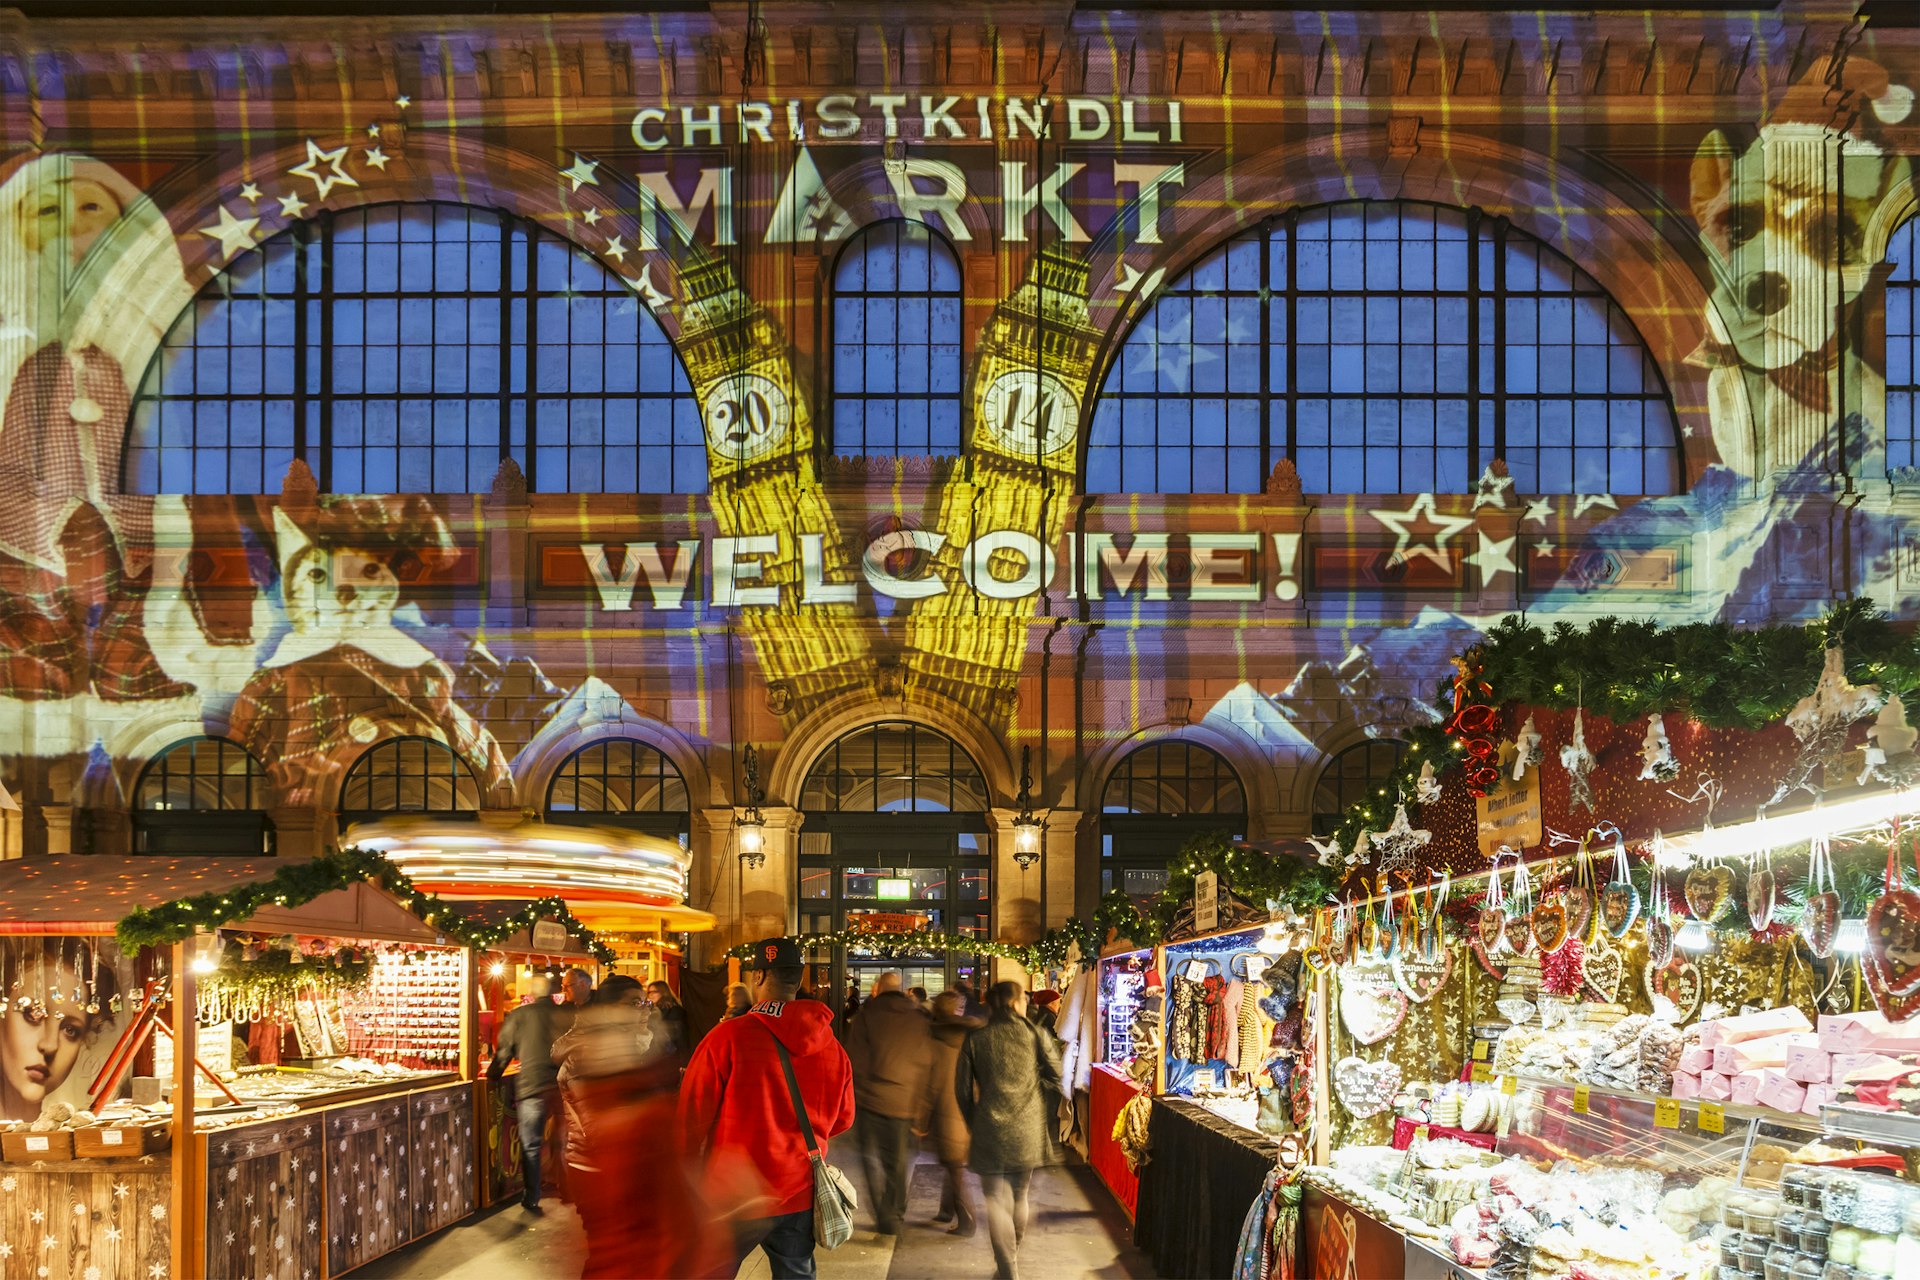 The Christmas market in the Central Station in Zurich hosts the largest indoor Christmas market in Europe with a large Christmas tree sparkling with over 7000 Swarovski crystals